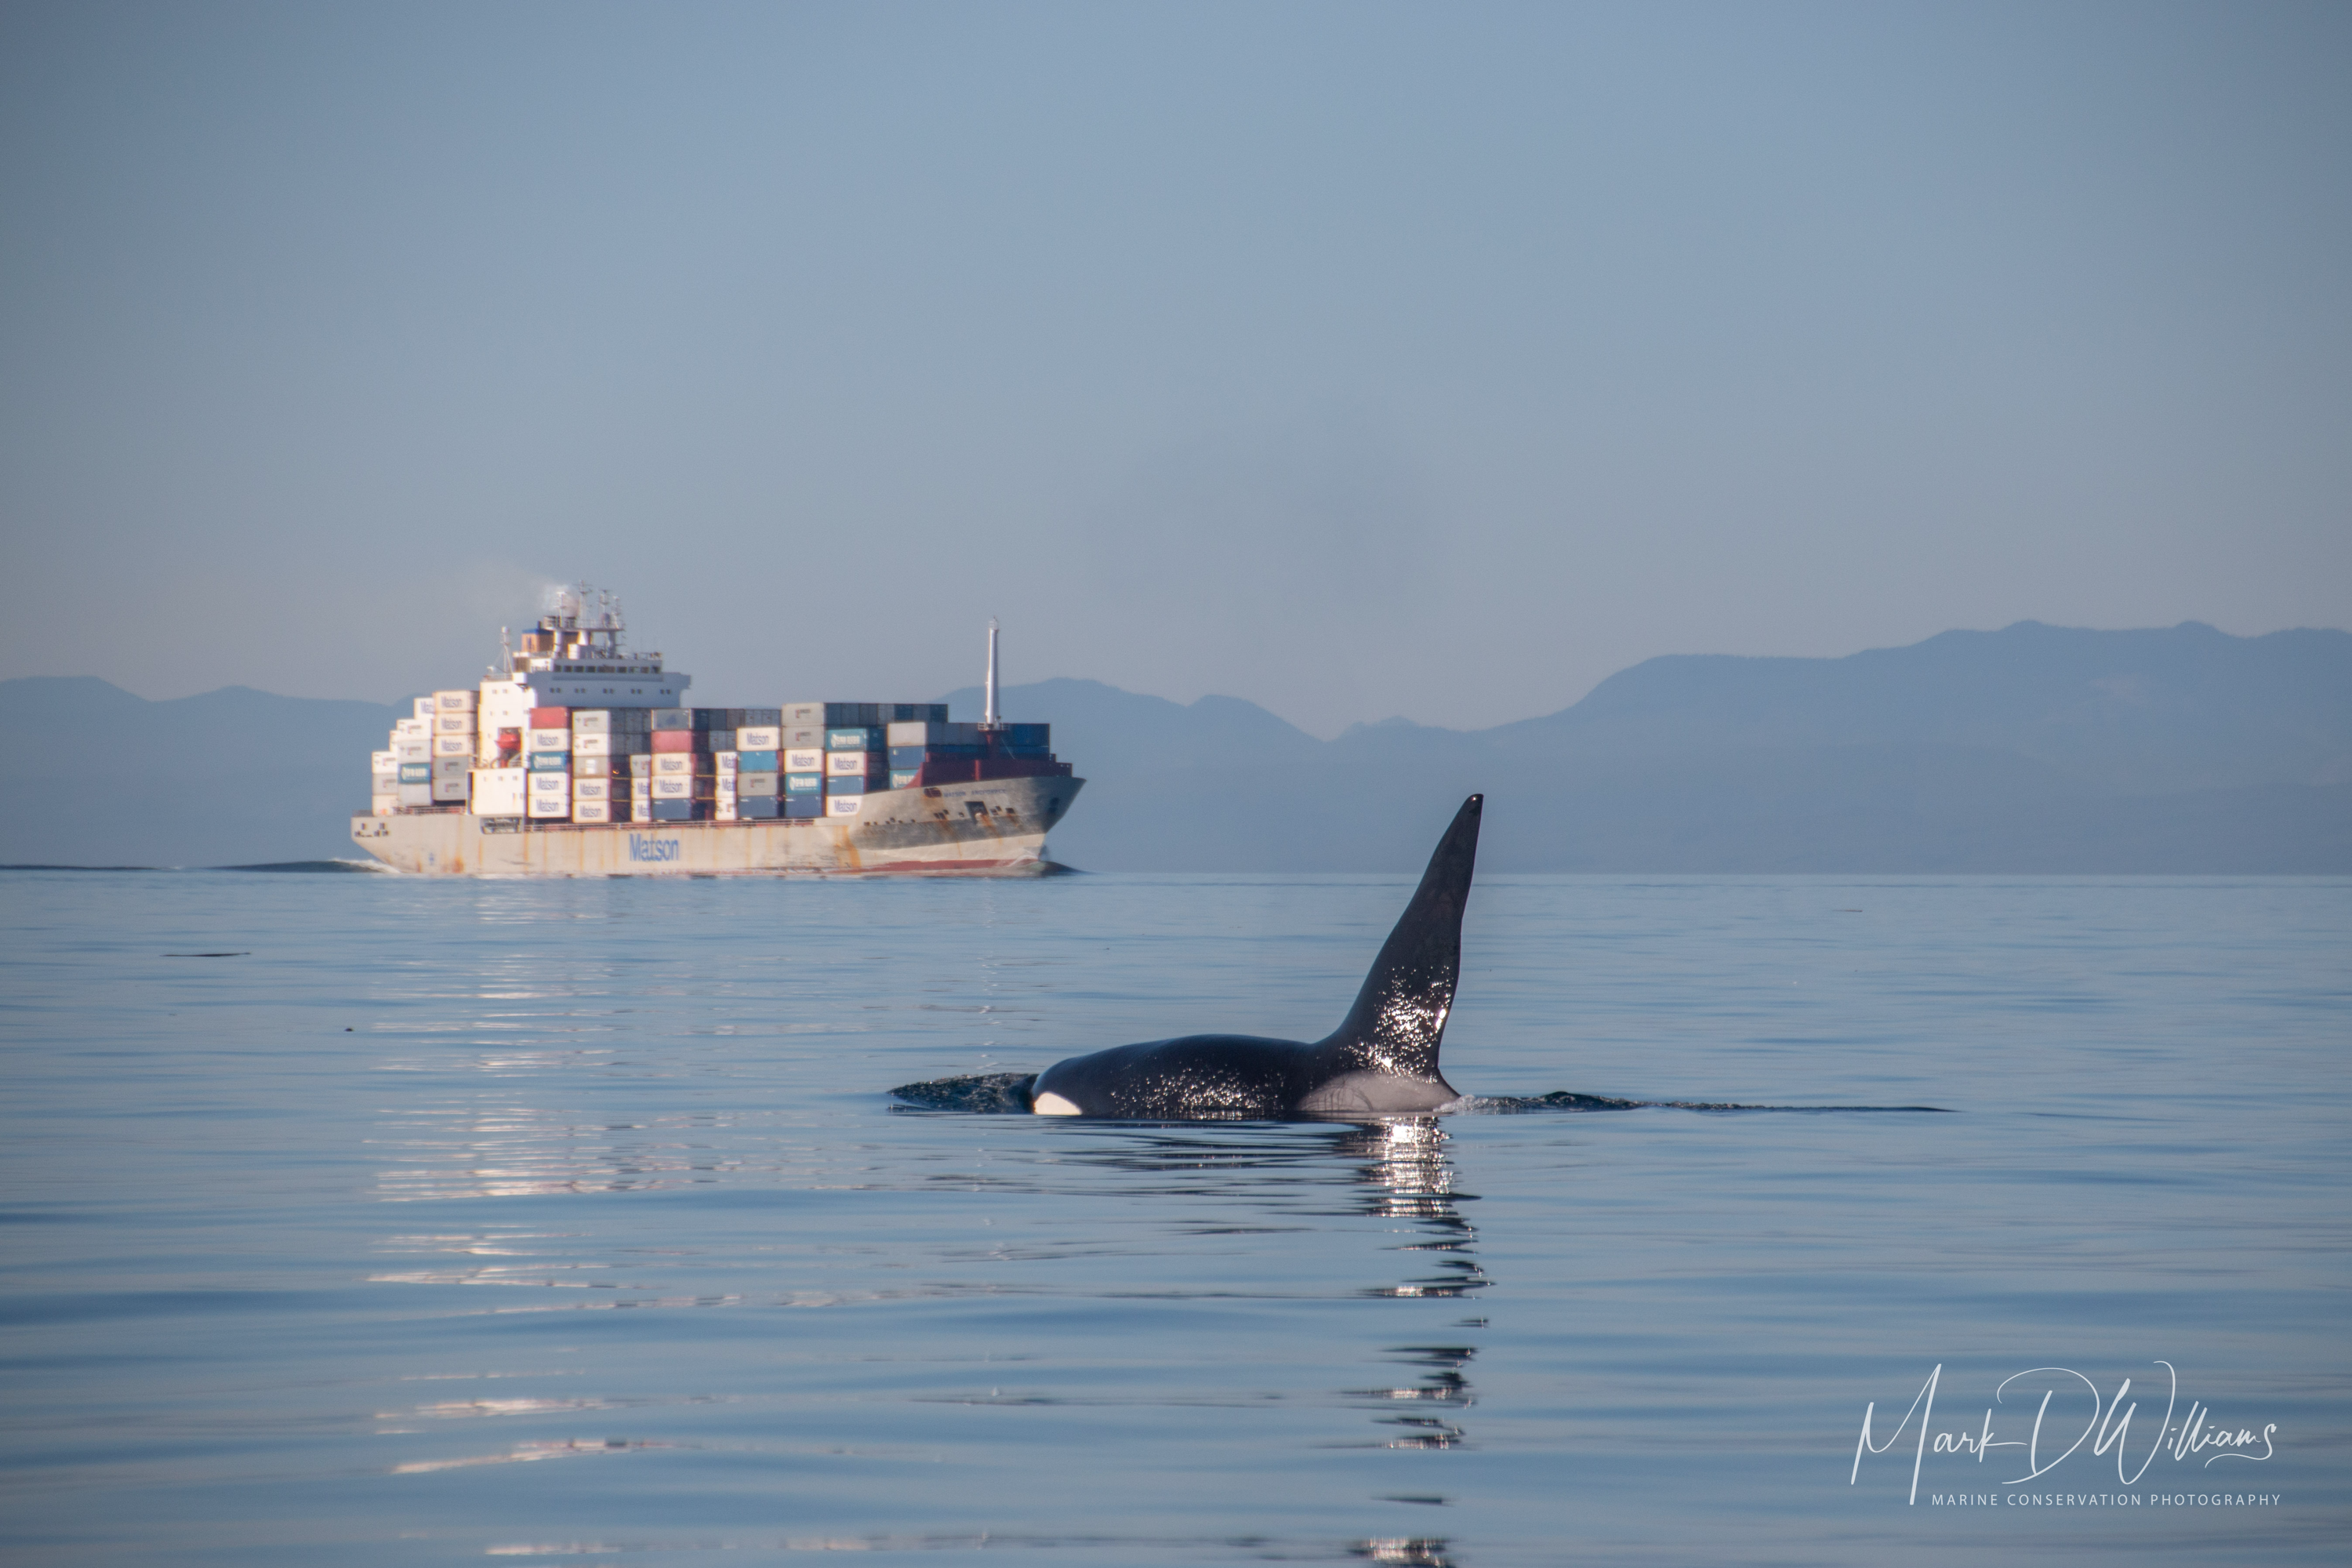 noisetracker Mark William's image of the orca and ship